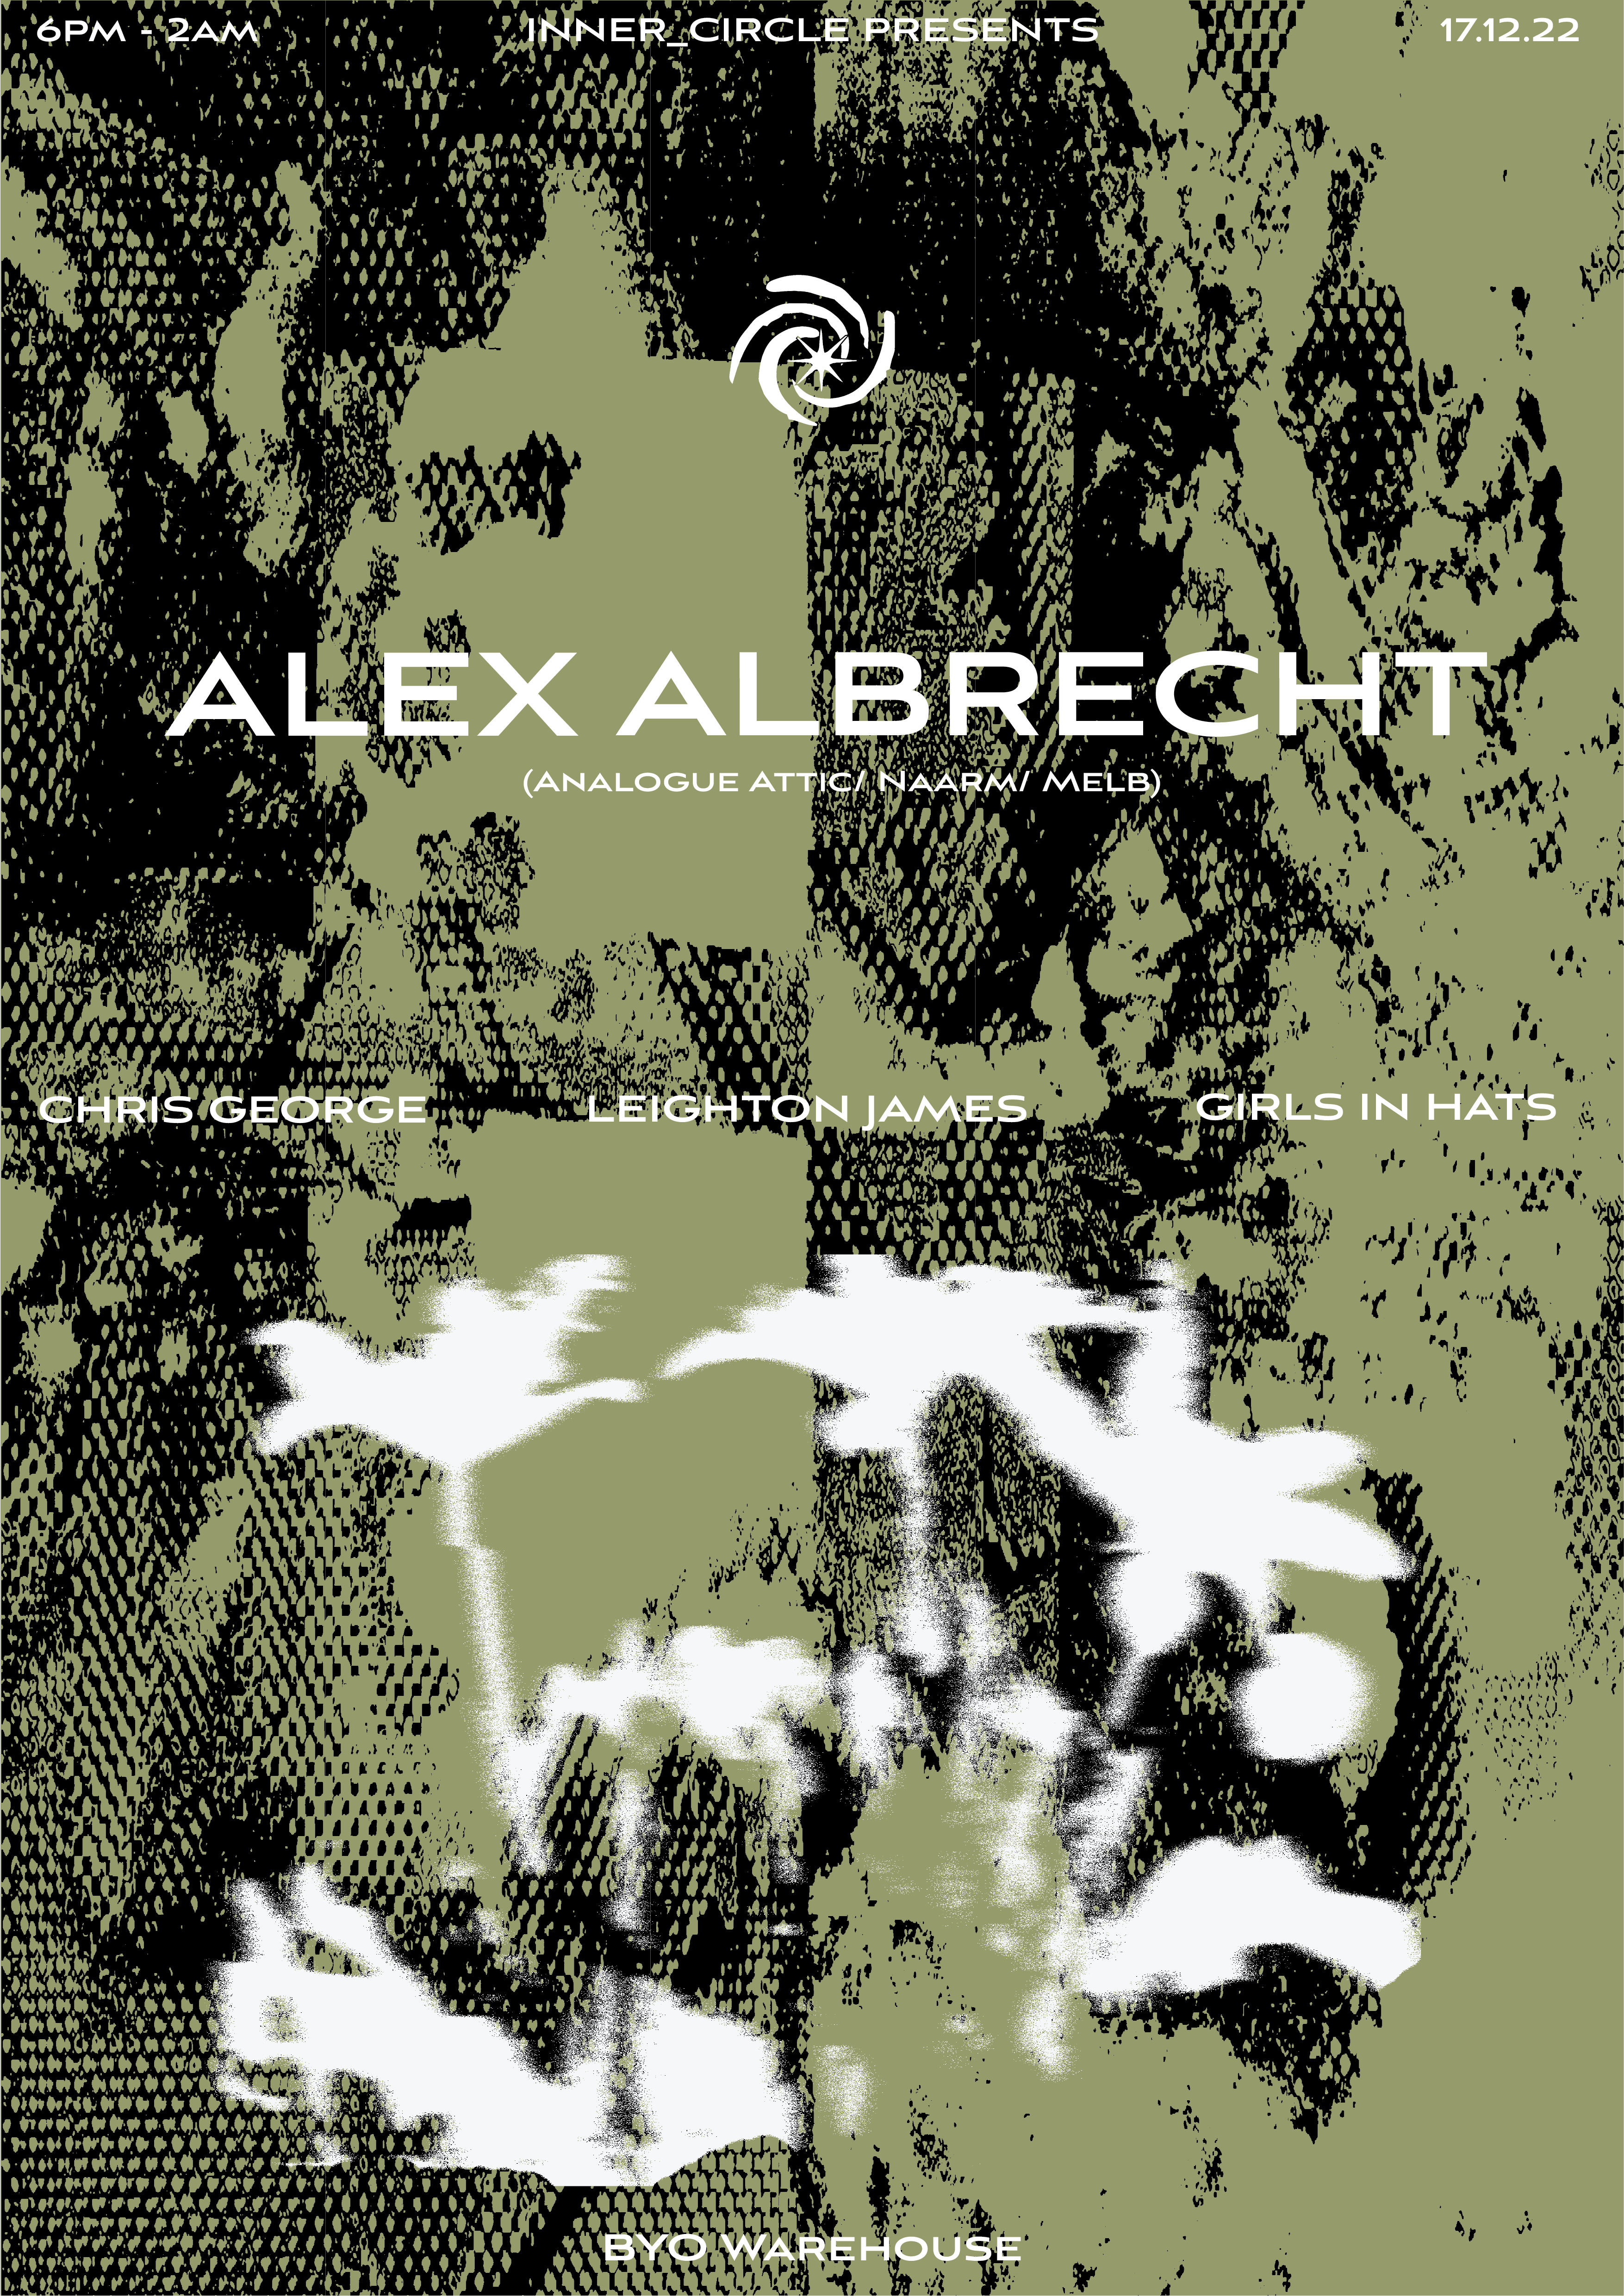 [CANCELLED] inner_circle presents Alex Albrecht (Analogue Attic/ Naarm) - BYO Warehouse Event - Página frontal